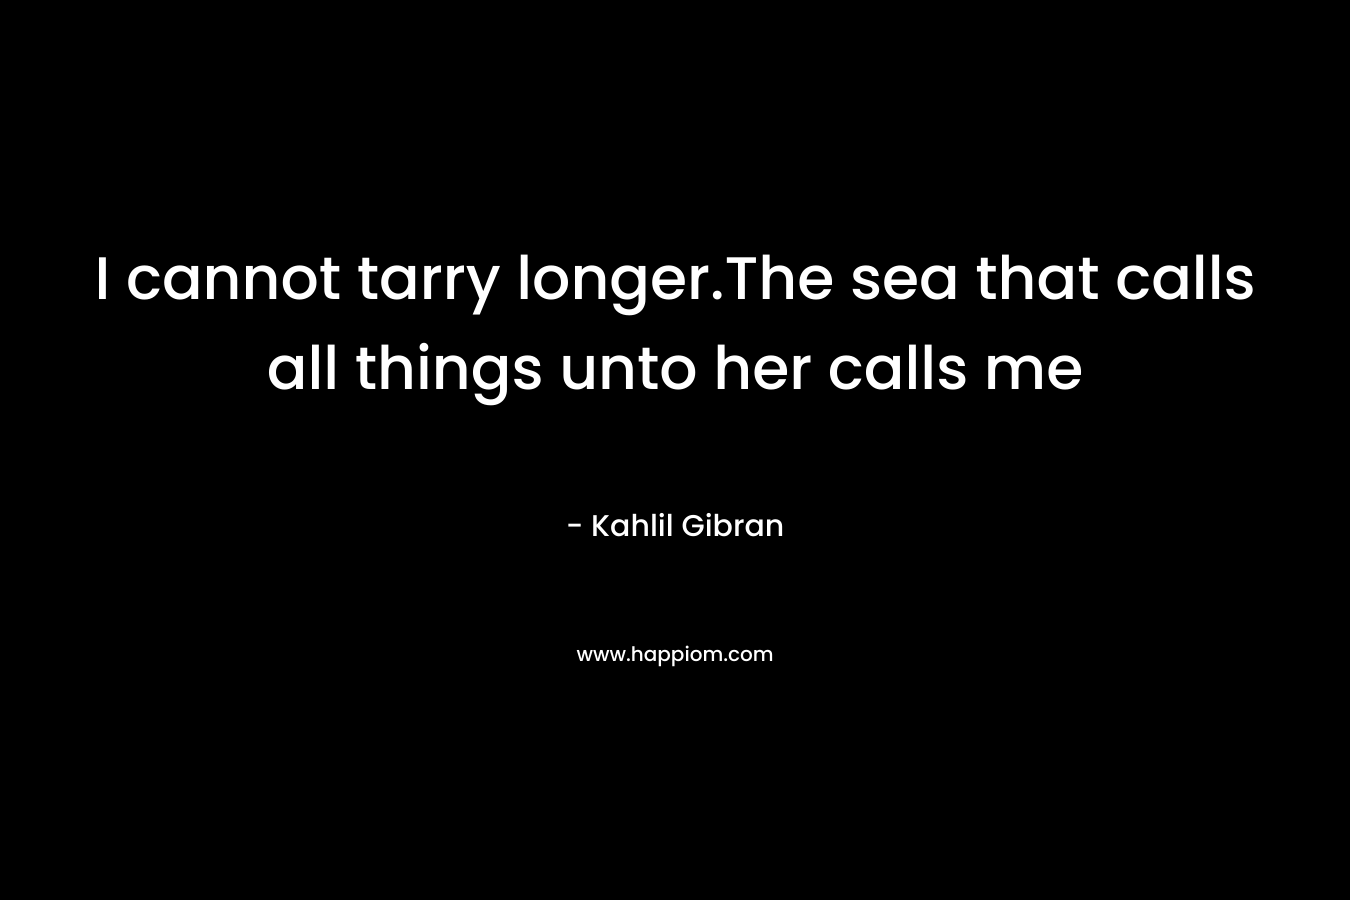 I cannot tarry longer.The sea that calls all things unto her calls me